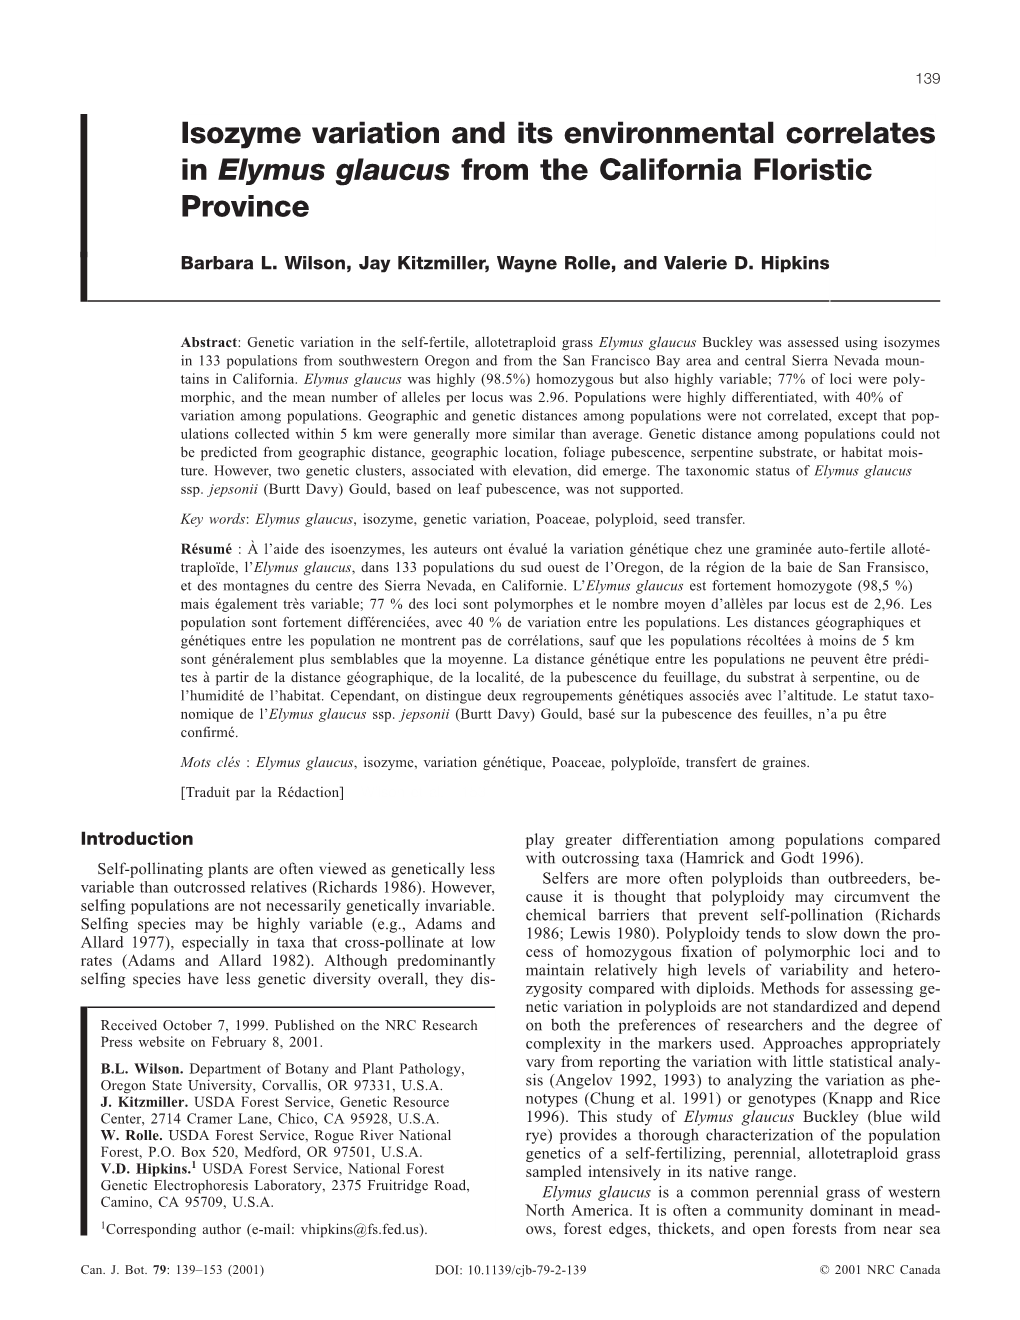 Isozyme Variation and Its Environmental Correlates in Elymus Glaucus from the California Floristic Province